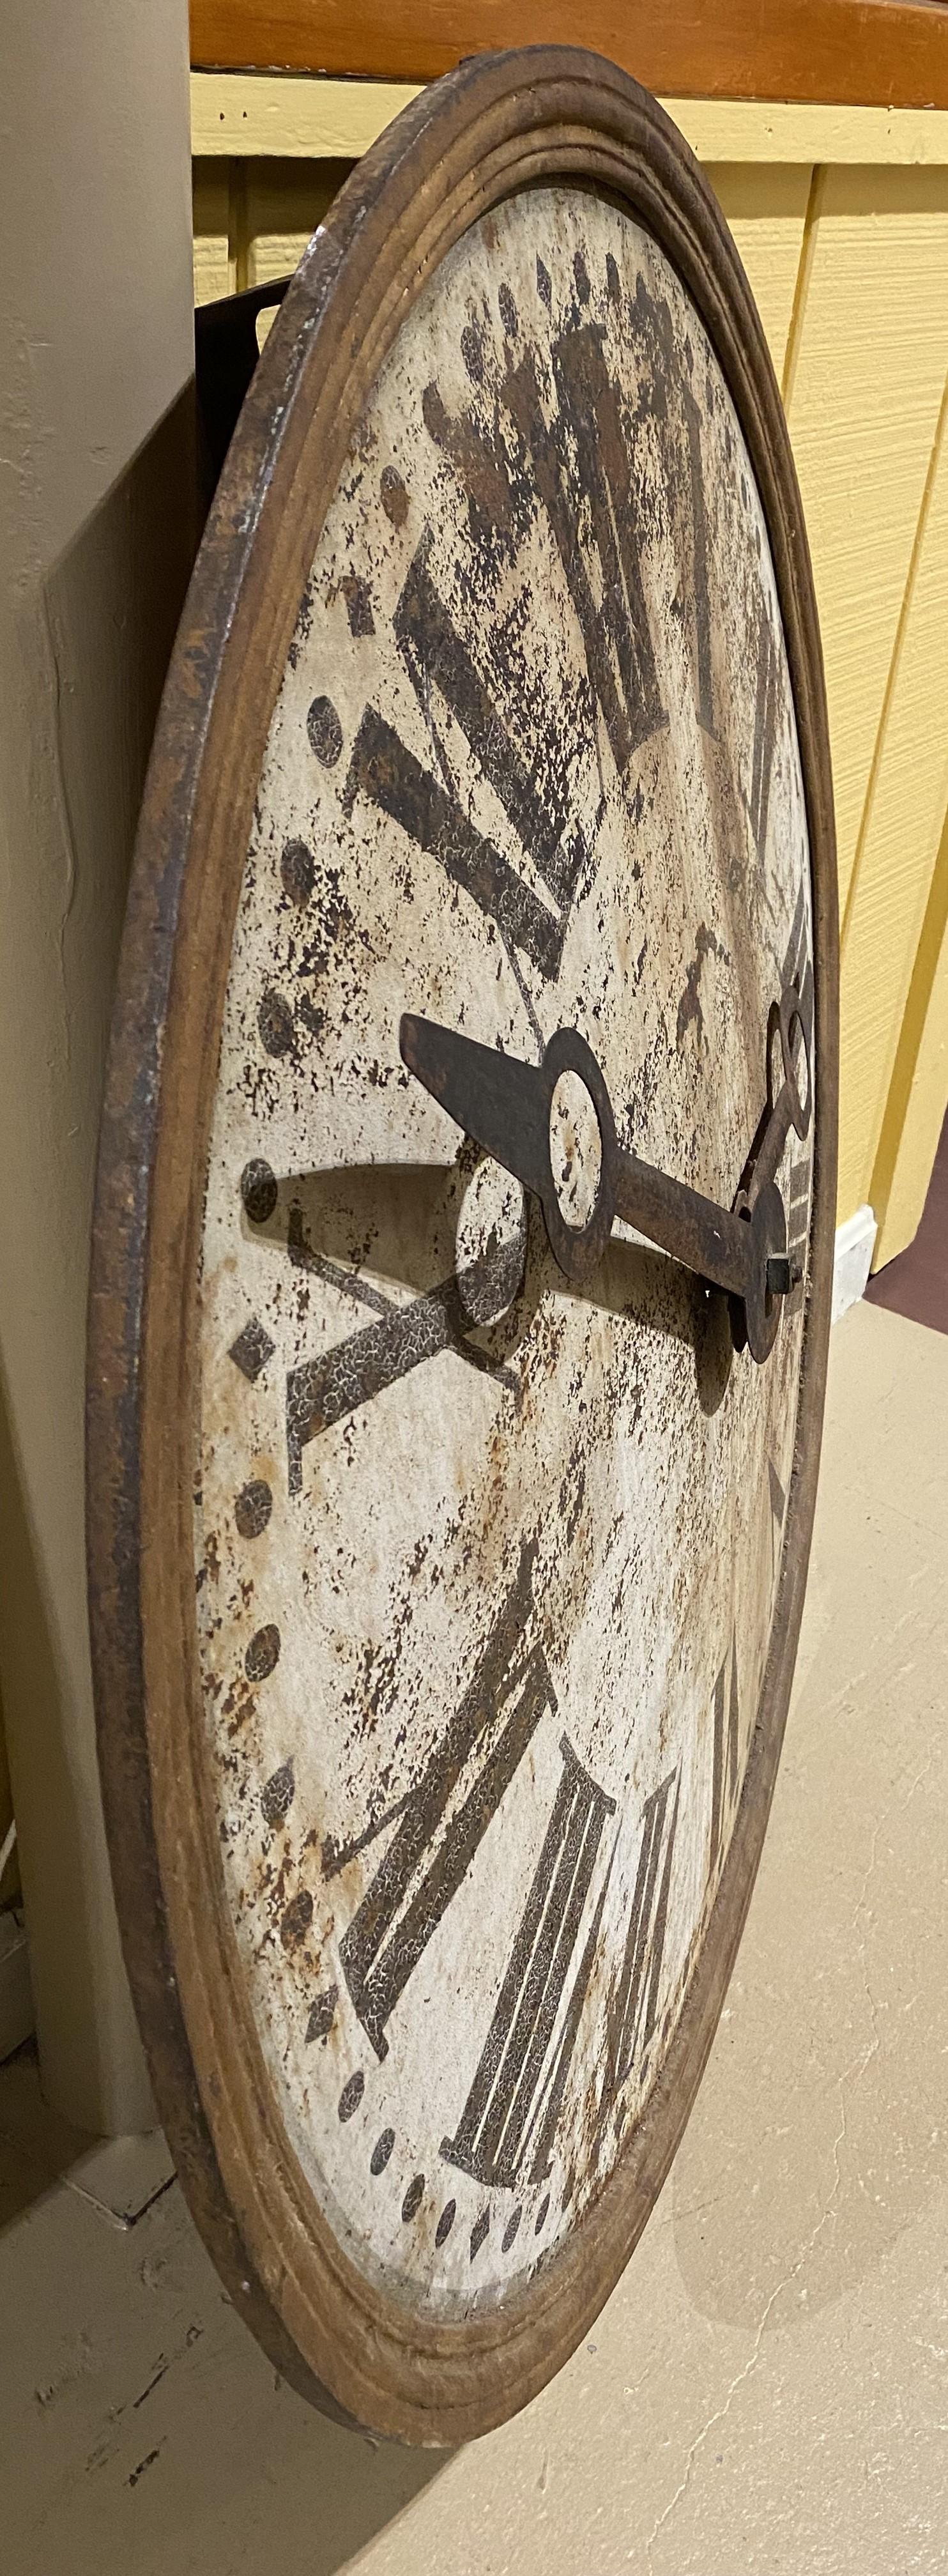 19th Century Iron Clock Dial with Hands circa 1825-1850 For Sale 3